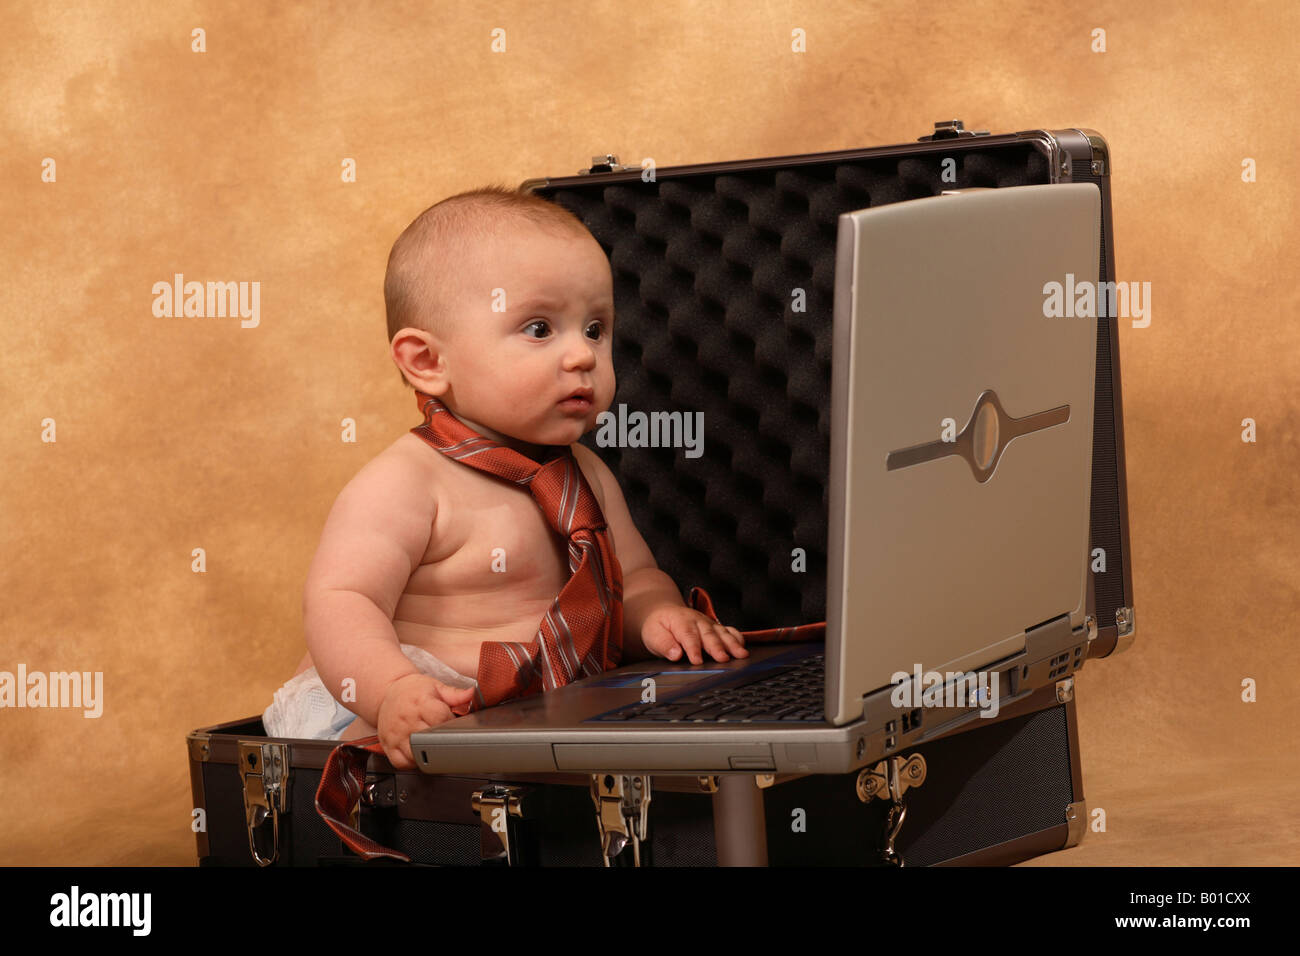 New Baby Computer User Error Problem IT Helpdesk infant Support Stock Photo